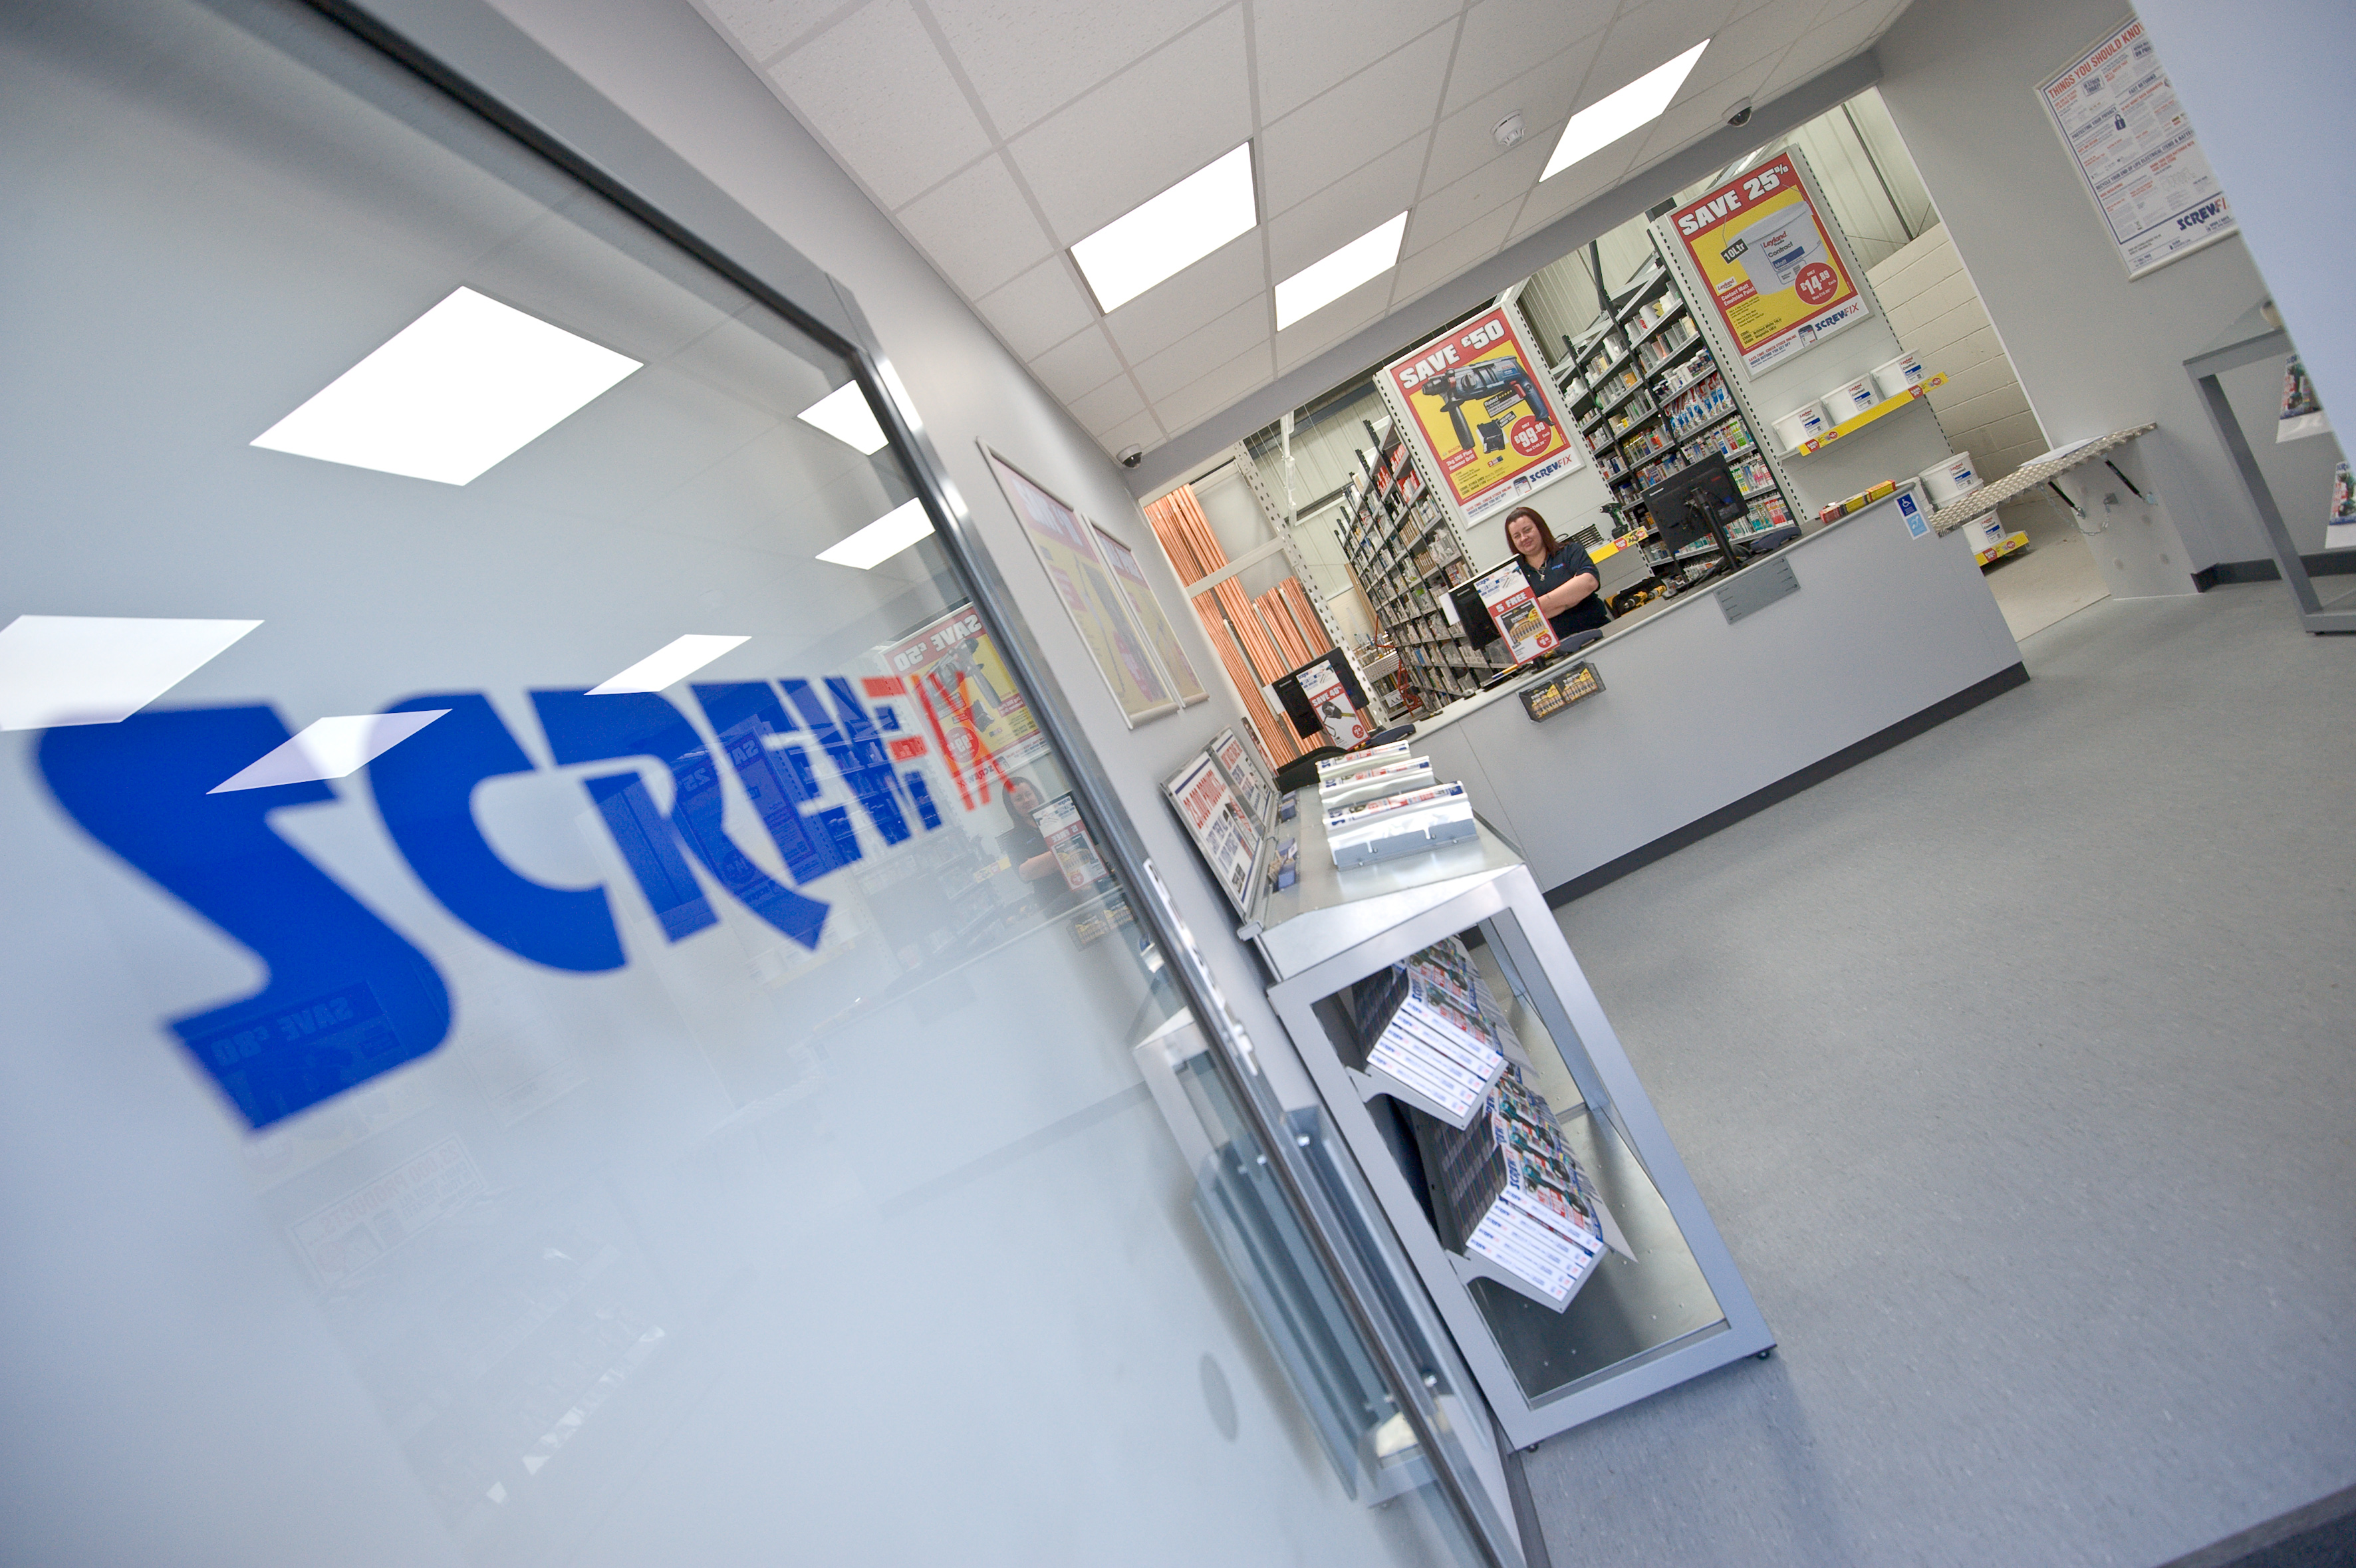 Sevenoaks’ first Screwfix store to open on 22nd October